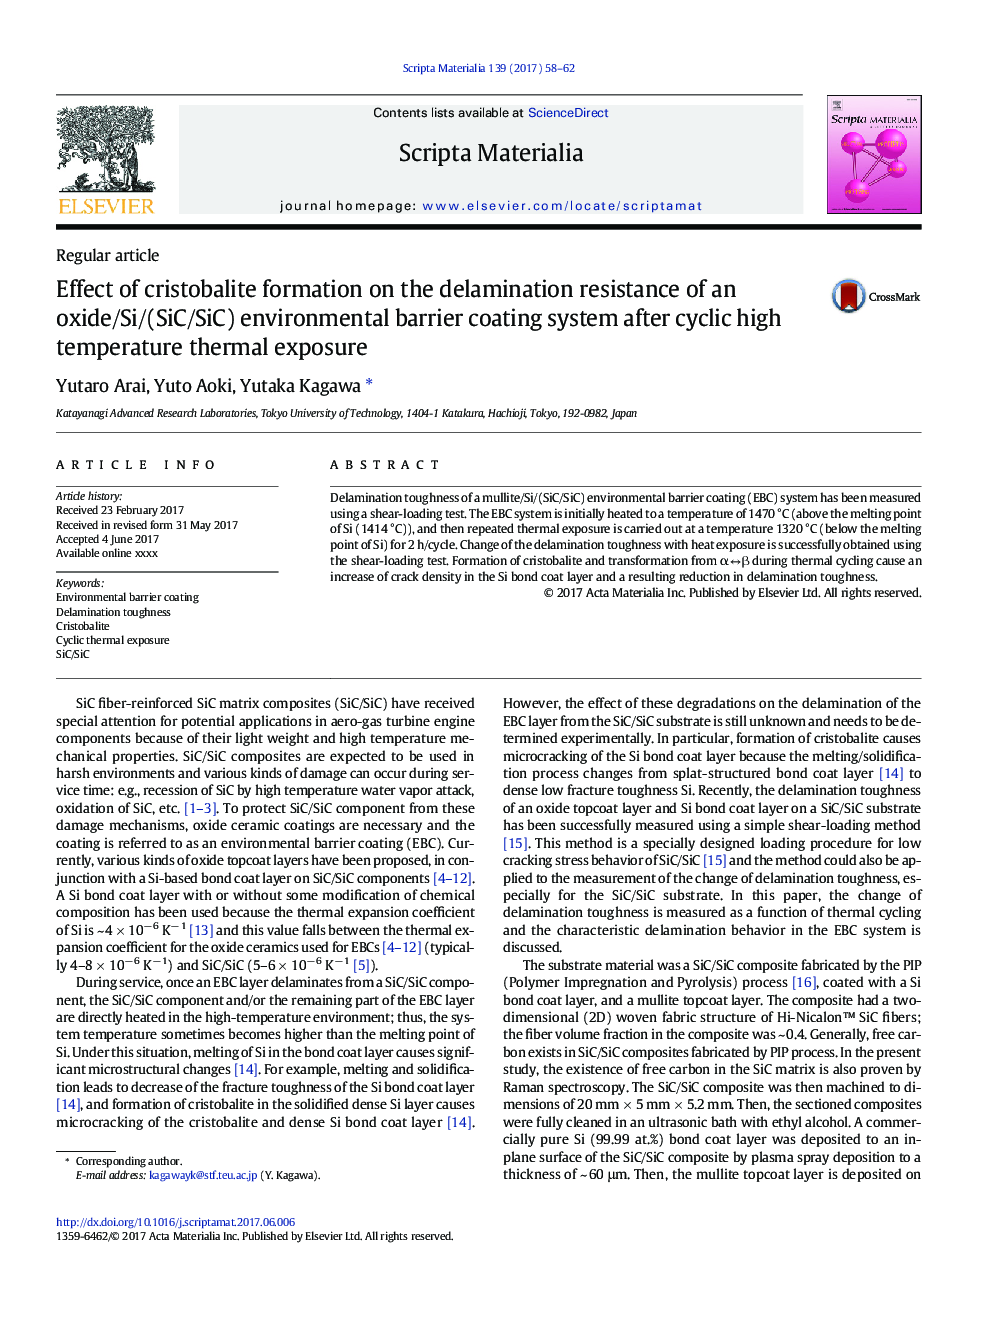 Effect of cristobalite formation on the delamination resistance of an oxide/Si/(SiC/SiC) environmental barrier coating system after cyclic high temperature thermal exposure